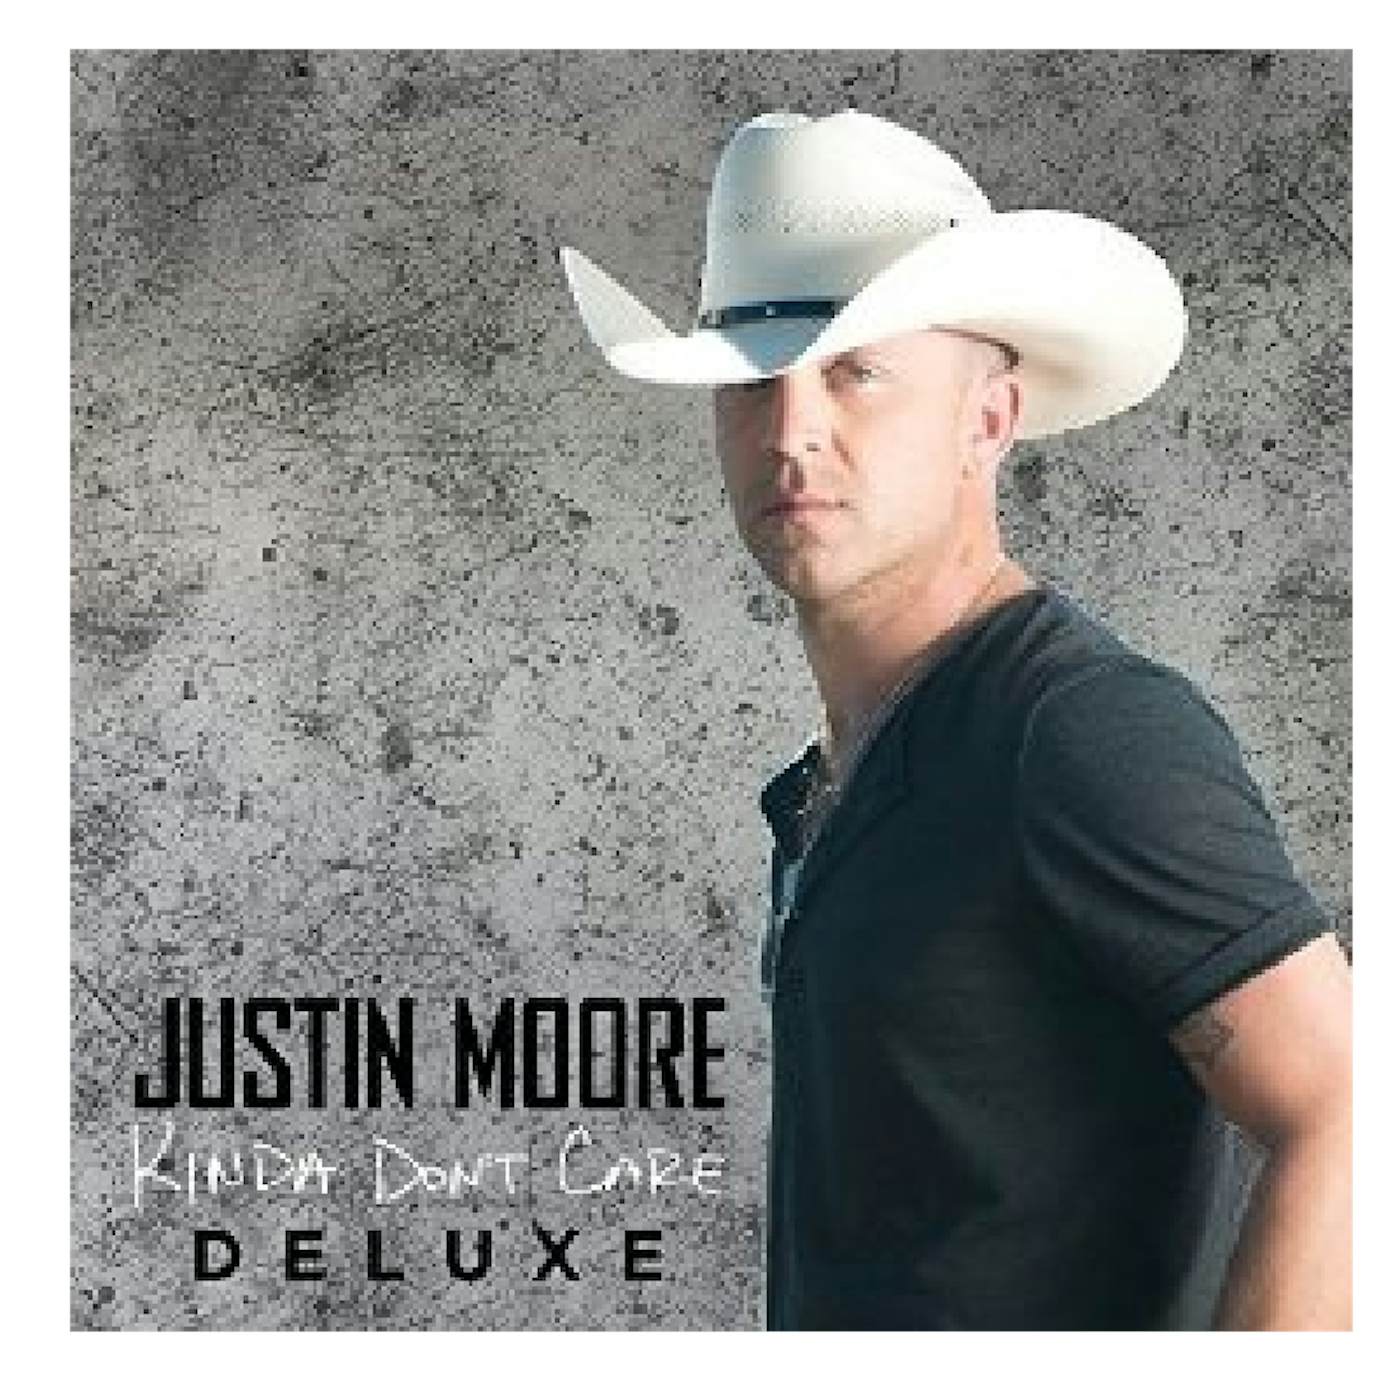 Justin Moore CD- Kinda Don't Care DELUXE